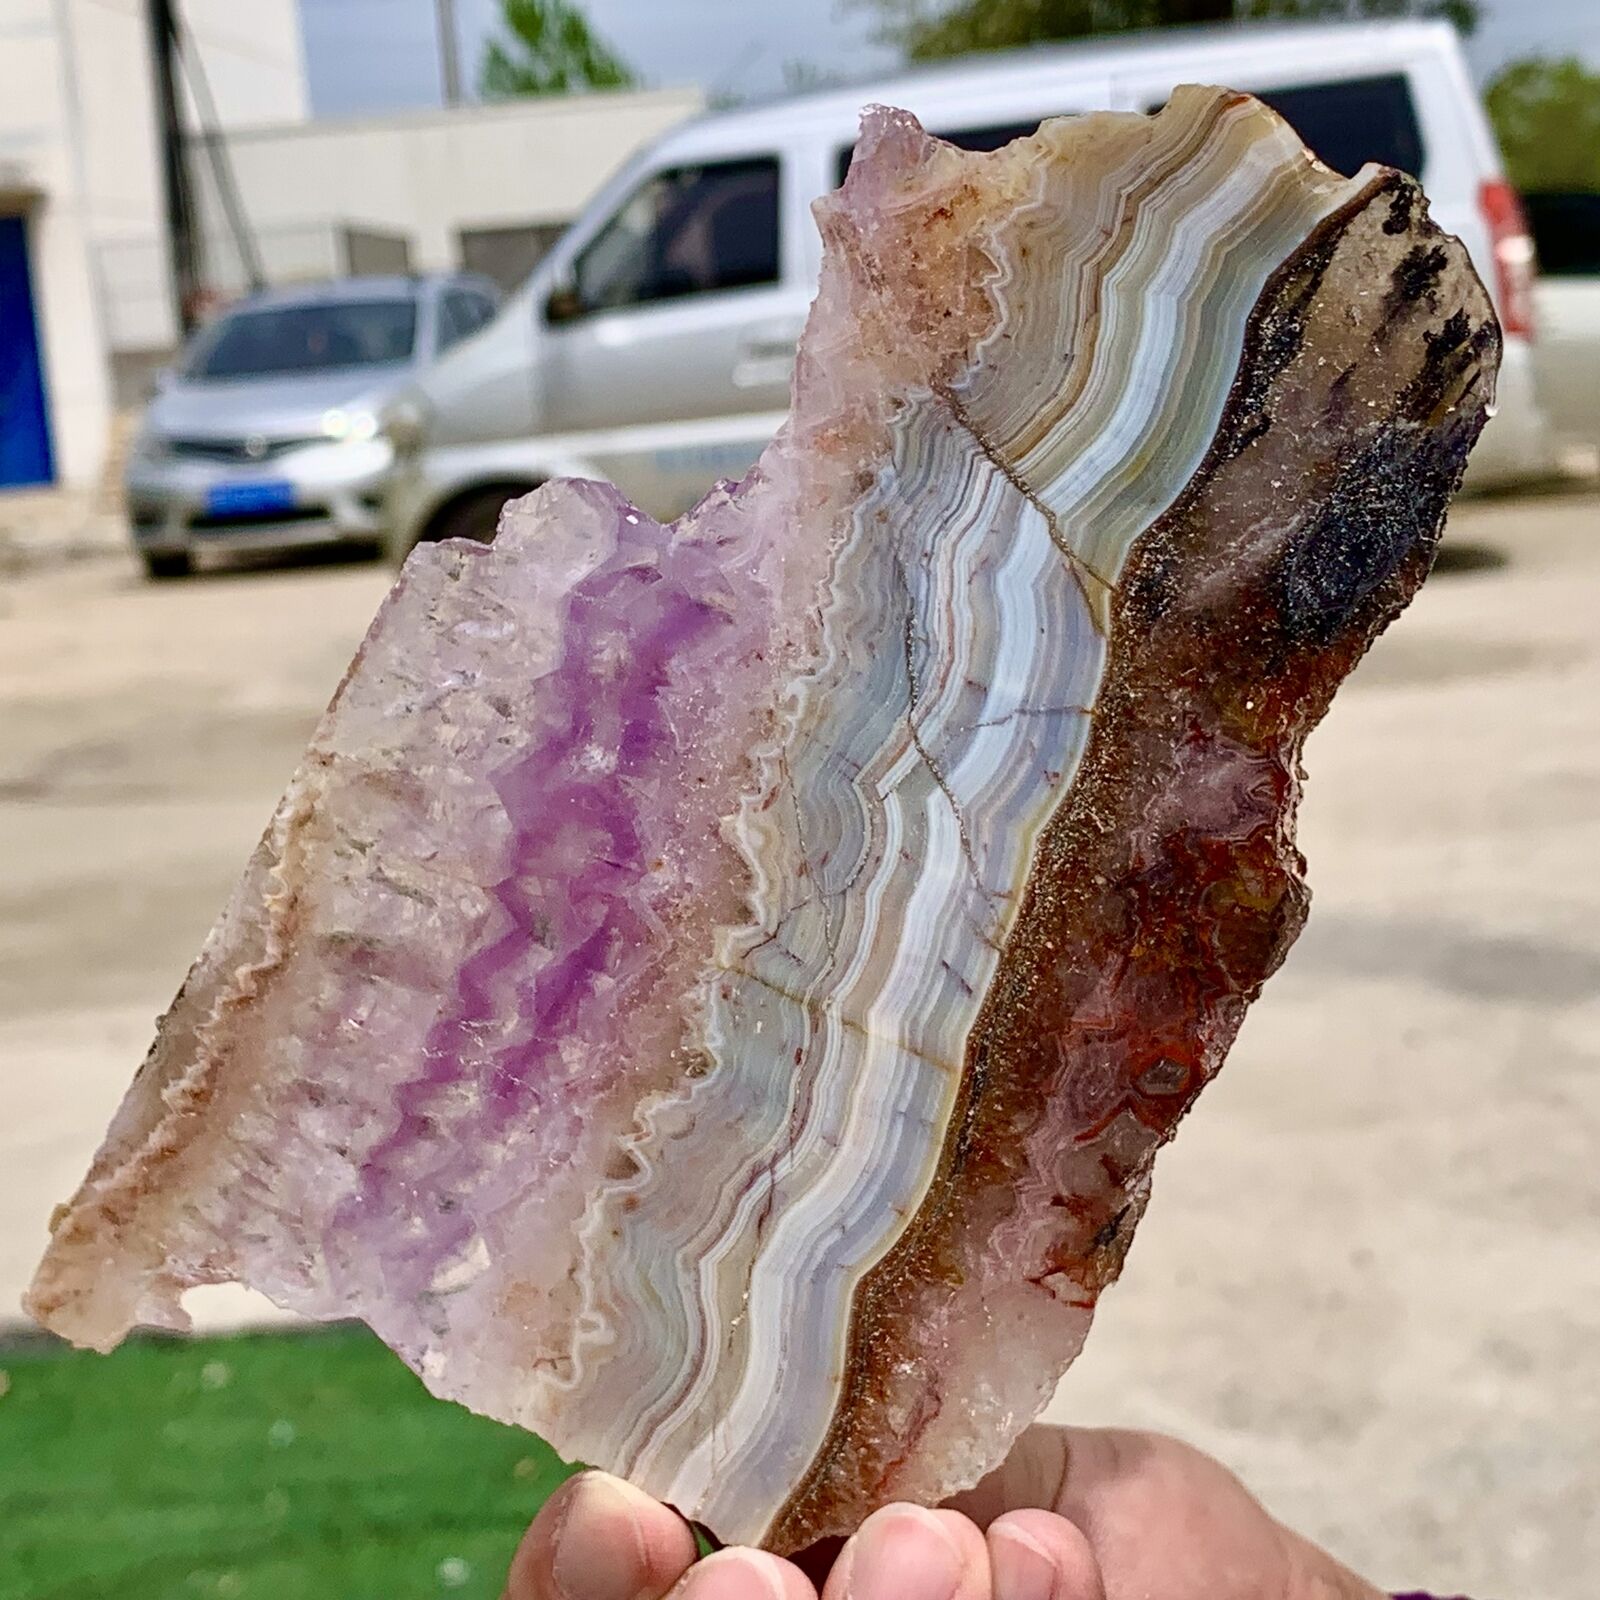 191G Natural and beautiful dreamy amethyst rough stone specimen